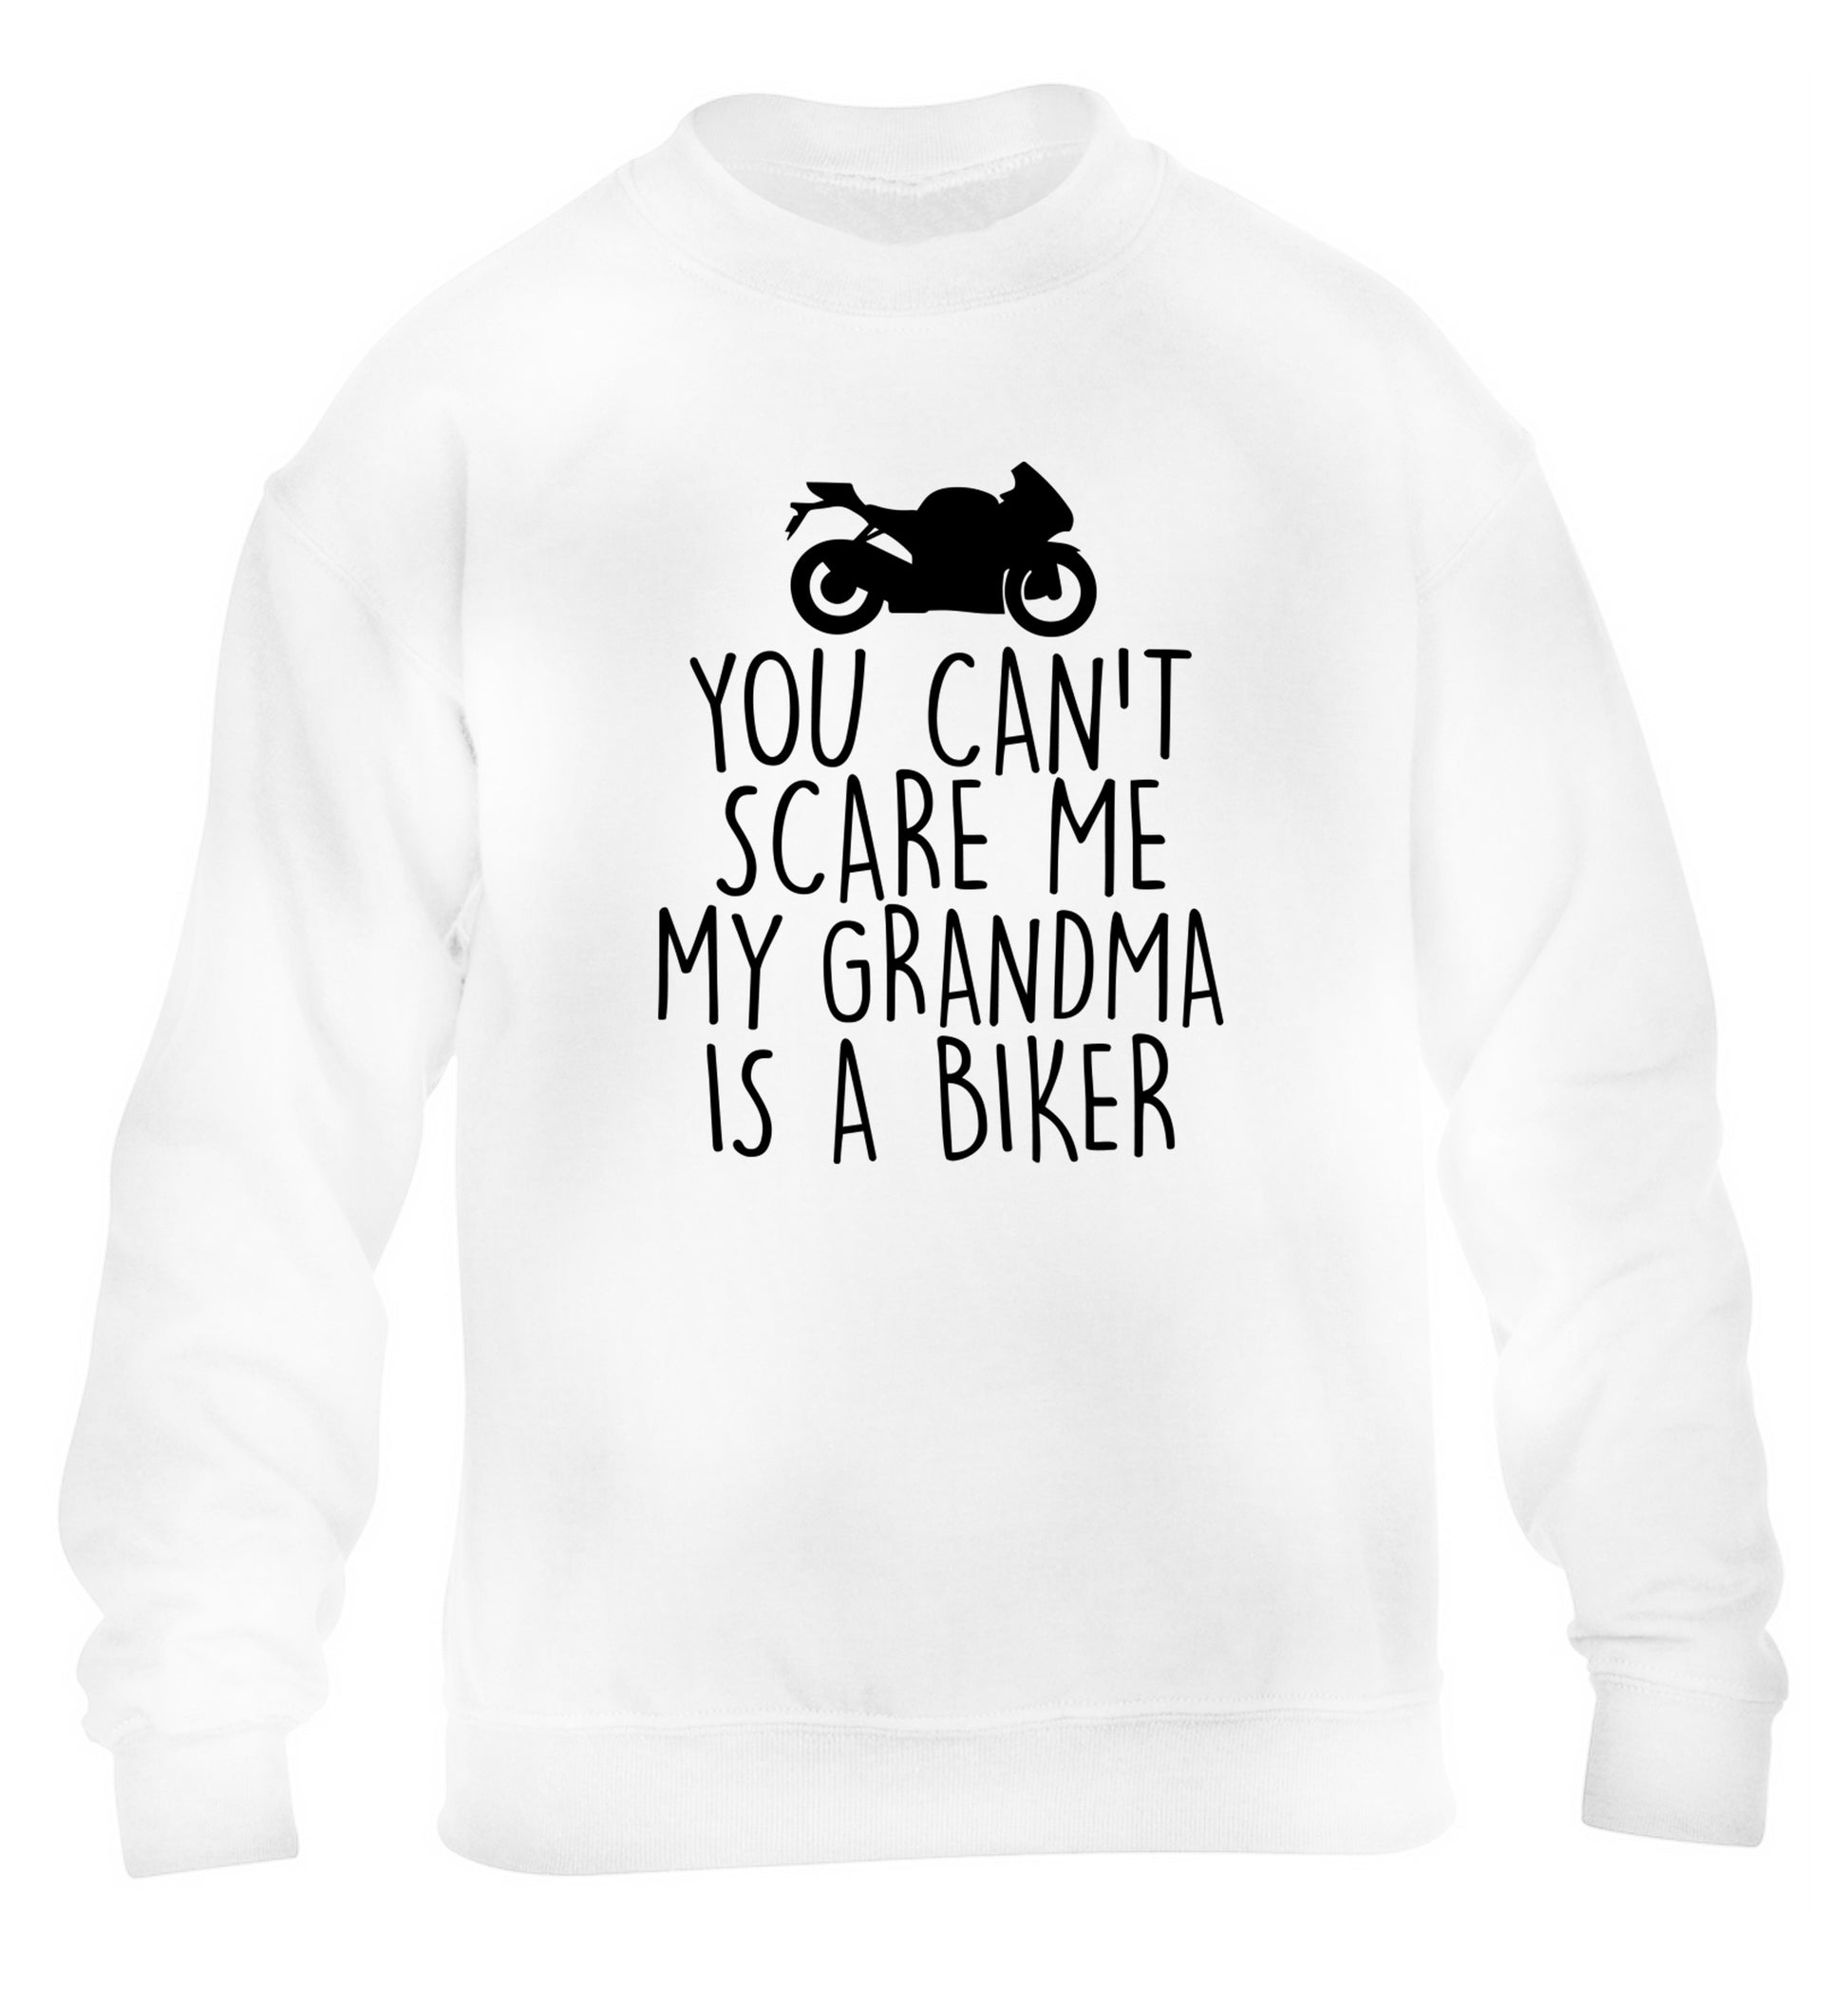 You can't scare me my grandma is a biker children's white sweater 12-13 Years